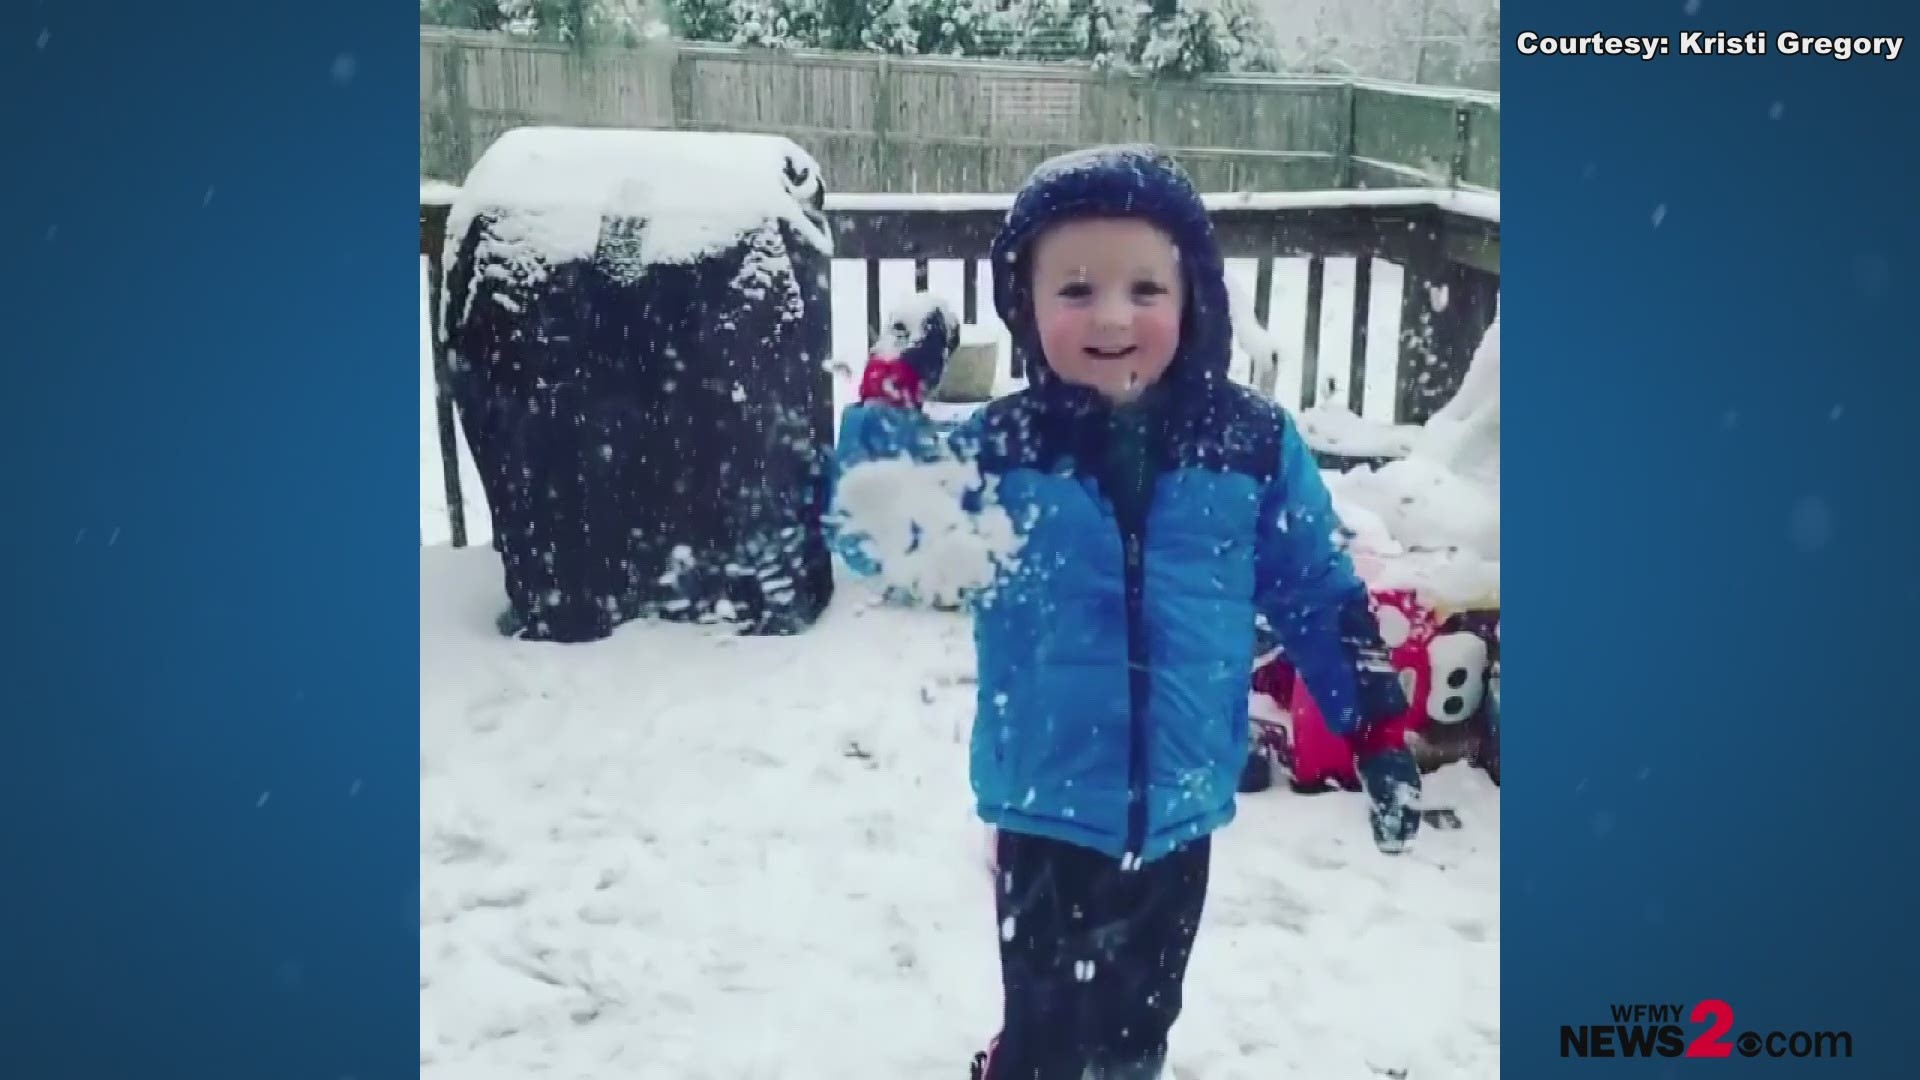 This little guy sure had some fun in the snow Thursday! Thanks to Kristi Gregory for sending in this cute video.